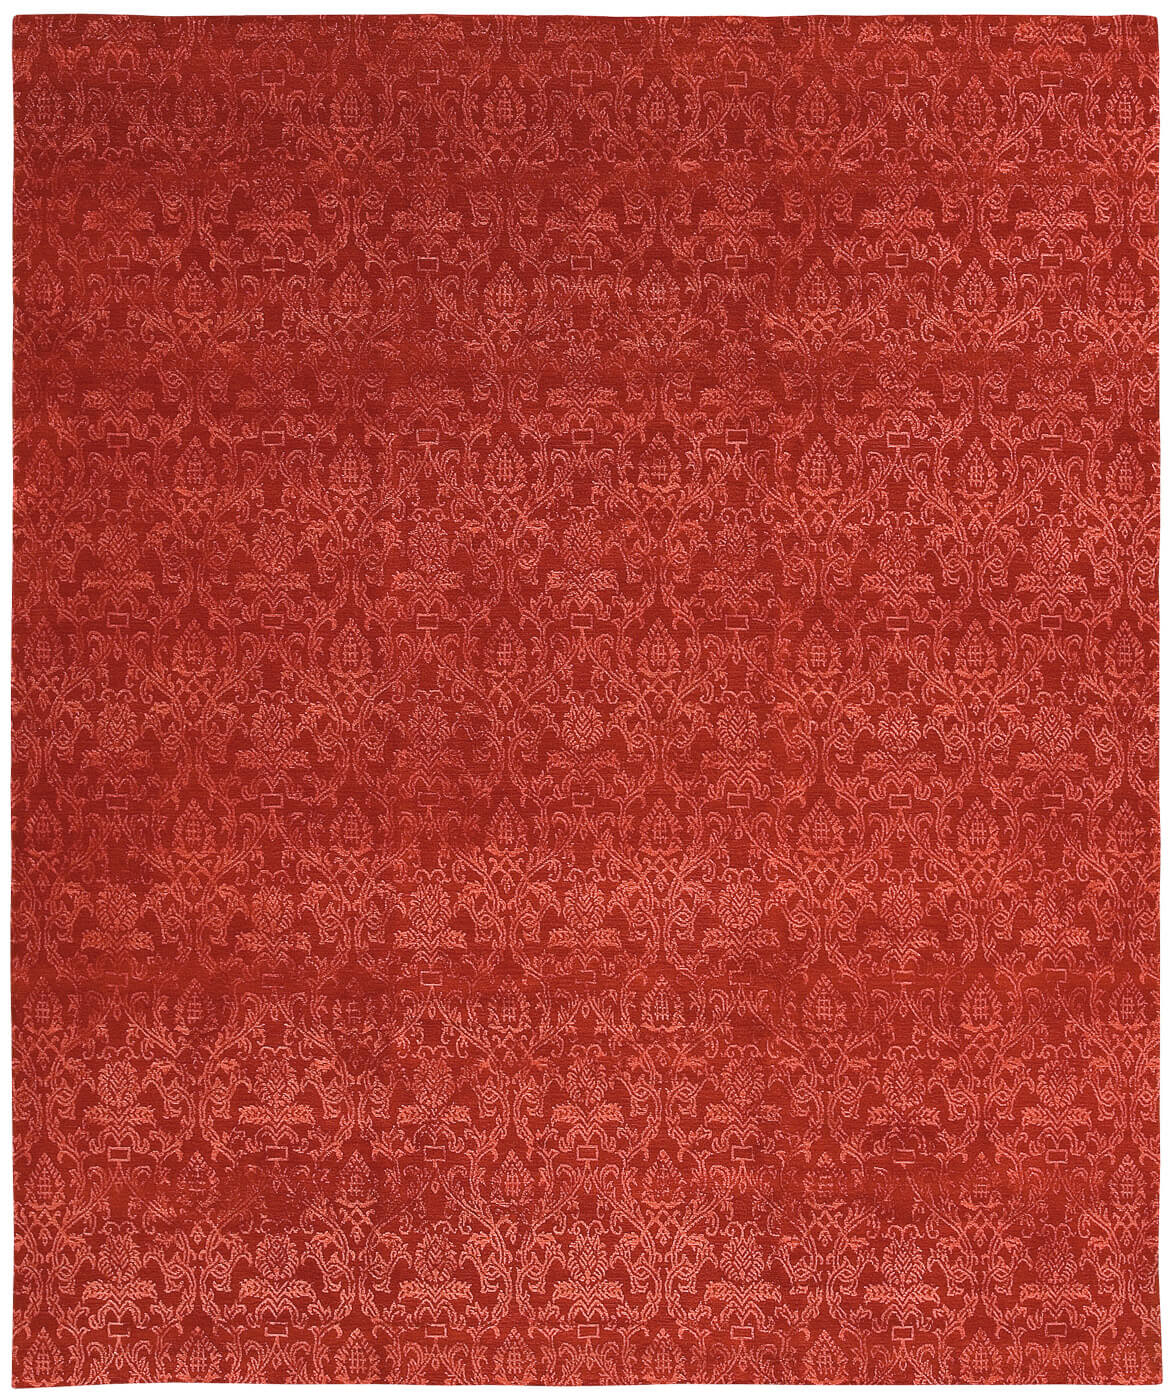 Roma Bright Red Luxury Hand-woven Rug ☞ Size: 300 x 400 cm